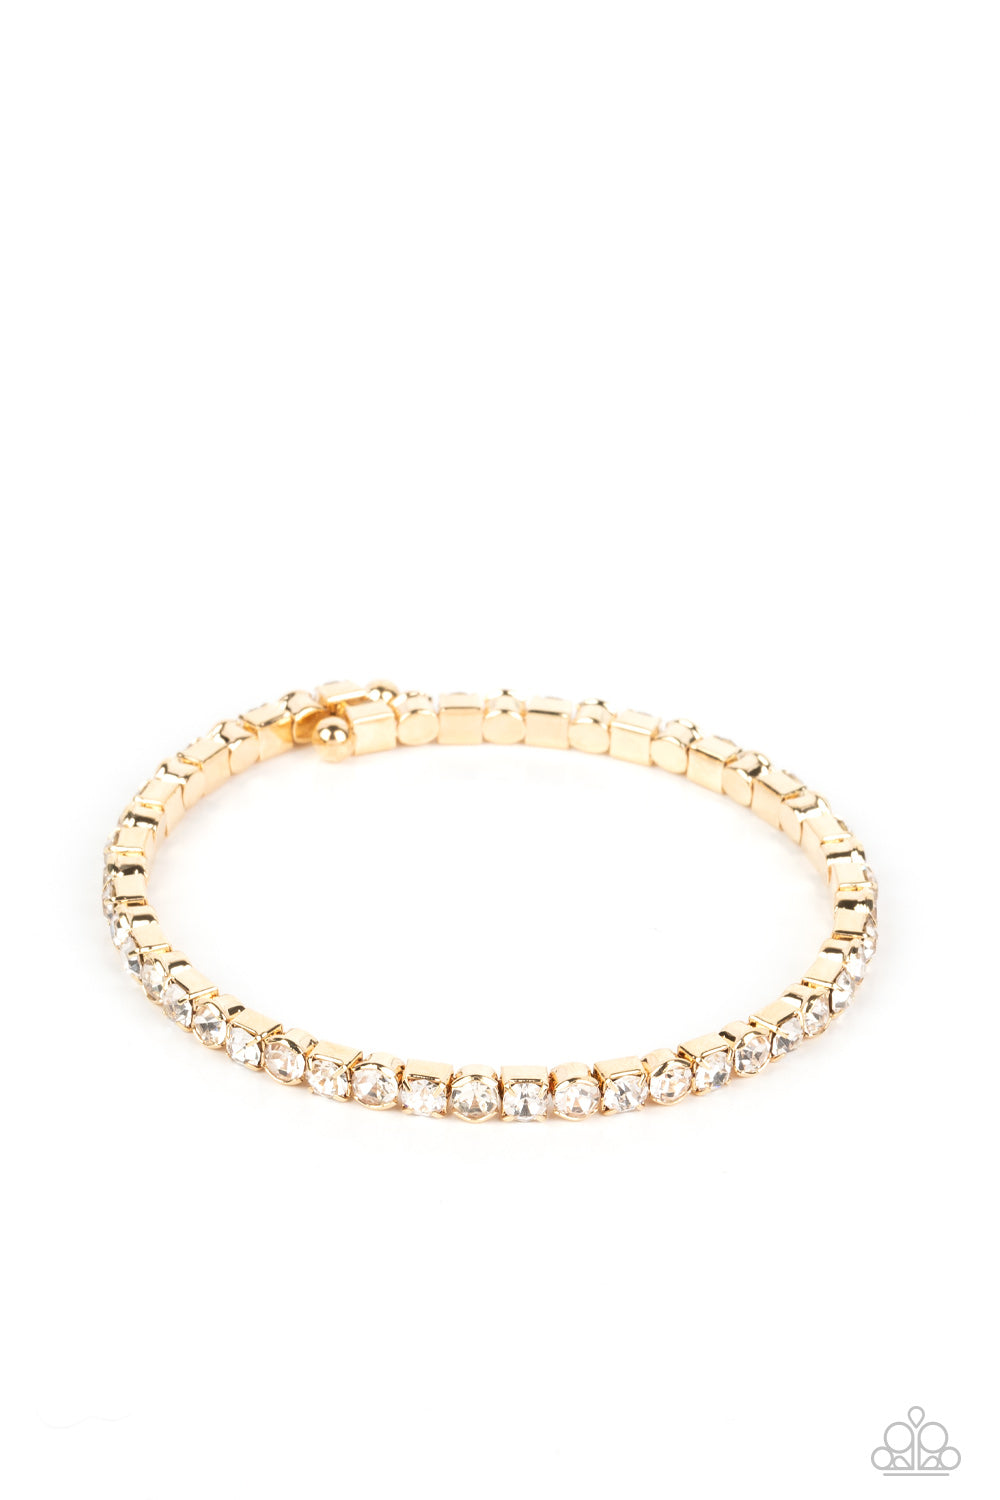 Paparazzi Accessories Rhinestone Spell - Gold Set in simple square and circular gold fittings, a sparkly strand of icy white rhinestones delicately curls around the wrist, resulting in a spellbinding cuff-like bracelet. Sold as one individual bracelet. Je